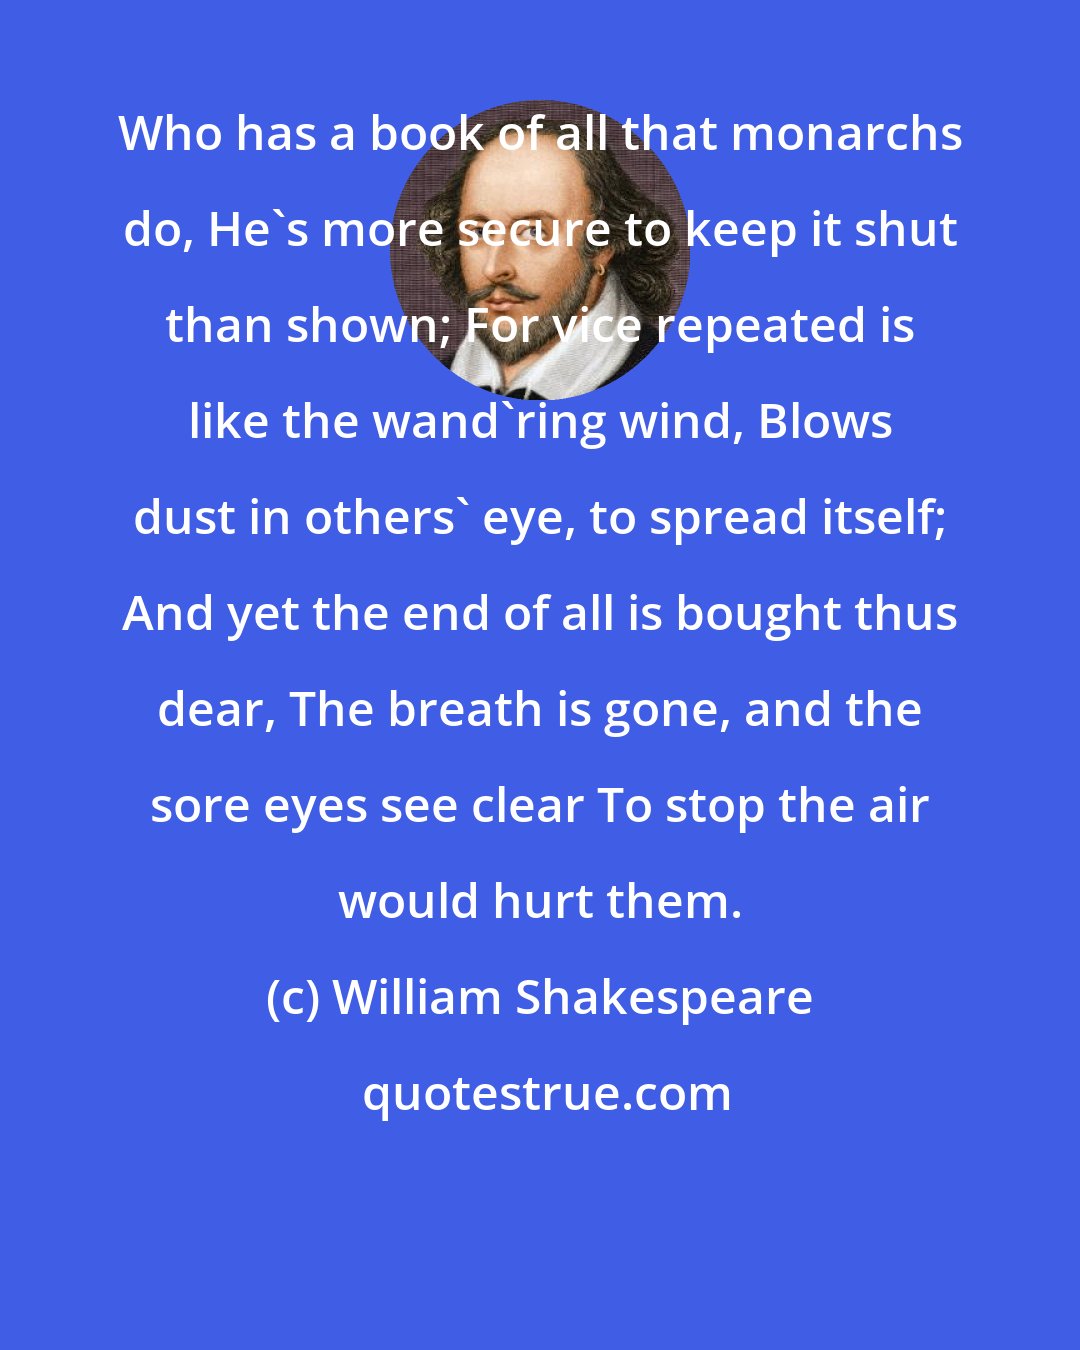 William Shakespeare: Who has a book of all that monarchs do, He's more secure to keep it shut than shown; For vice repeated is like the wand'ring wind, Blows dust in others' eye, to spread itself; And yet the end of all is bought thus dear, The breath is gone, and the sore eyes see clear To stop the air would hurt them.